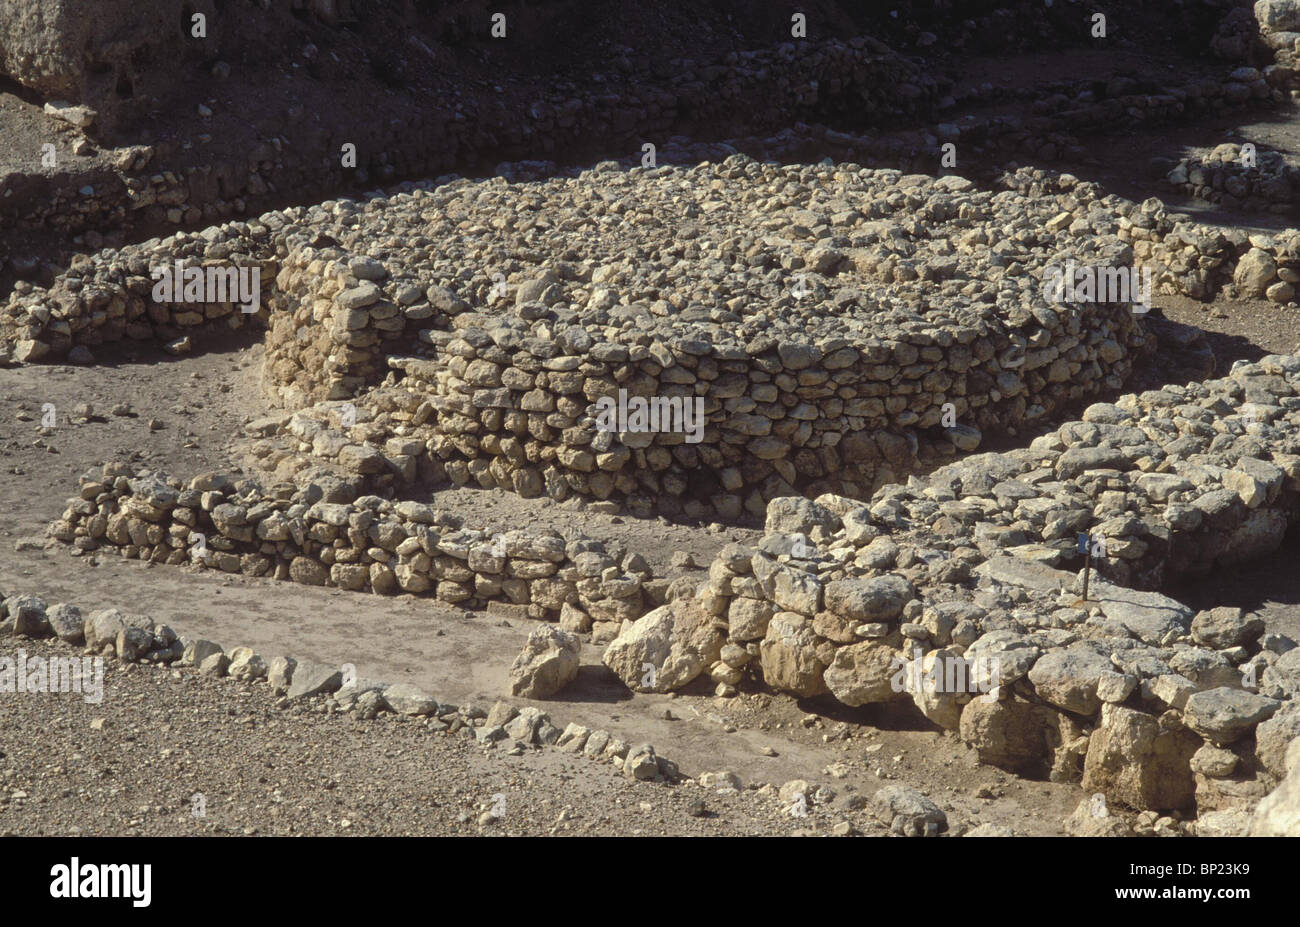 235. MEGIDDO, REMAINS OF THE CNAANITE TEMPLE WITH THE LARGE ROUND ALTAR DATING FROM C. 2500 - 1850 B.C. Stock Photo